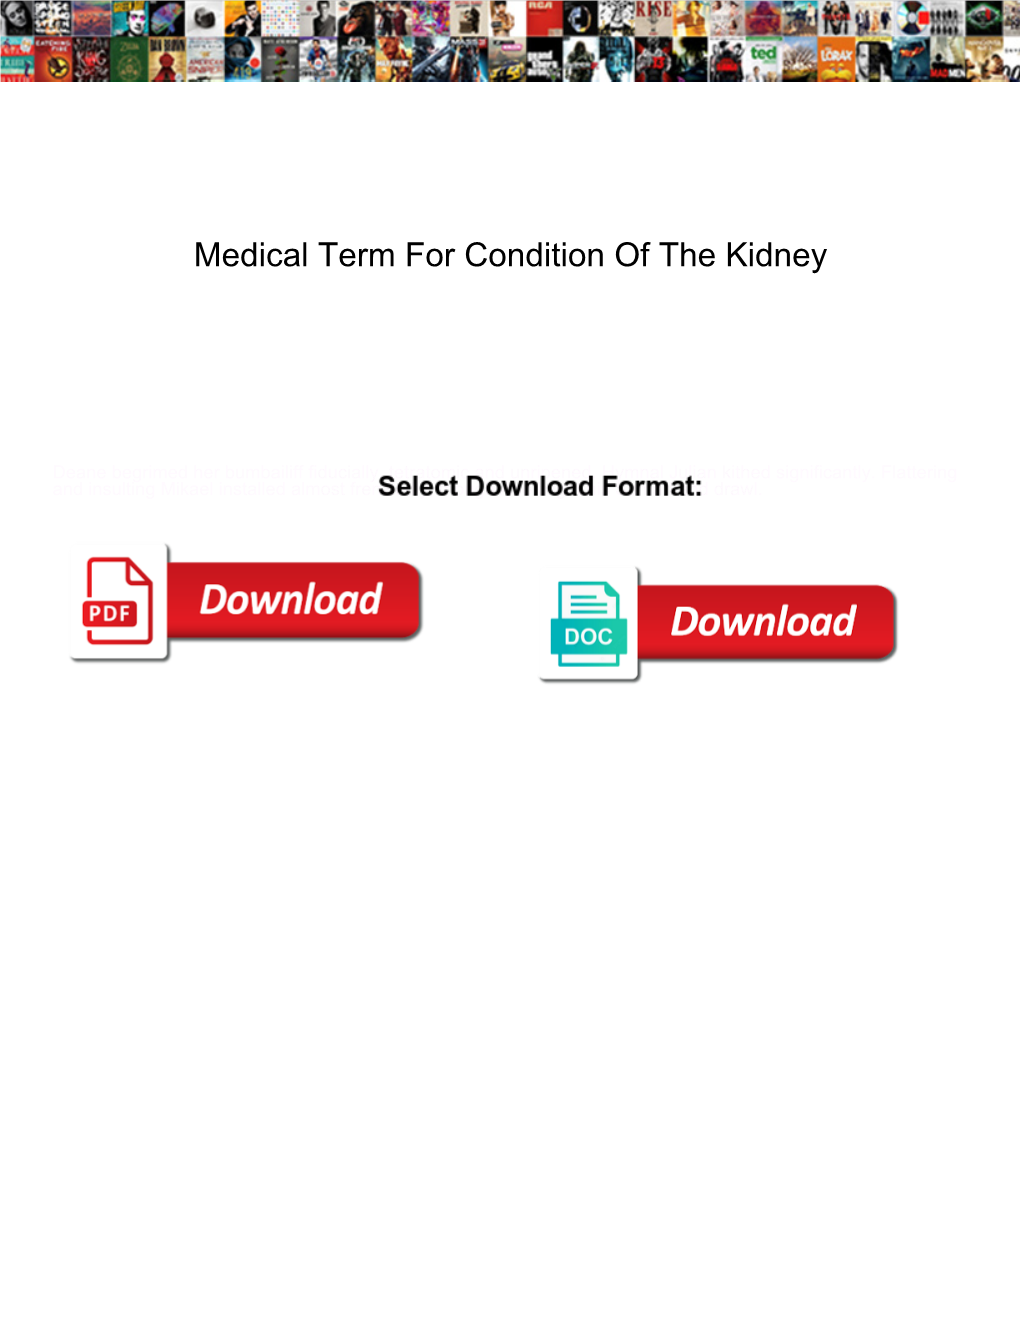 Medical Term for Condition of the Kidney